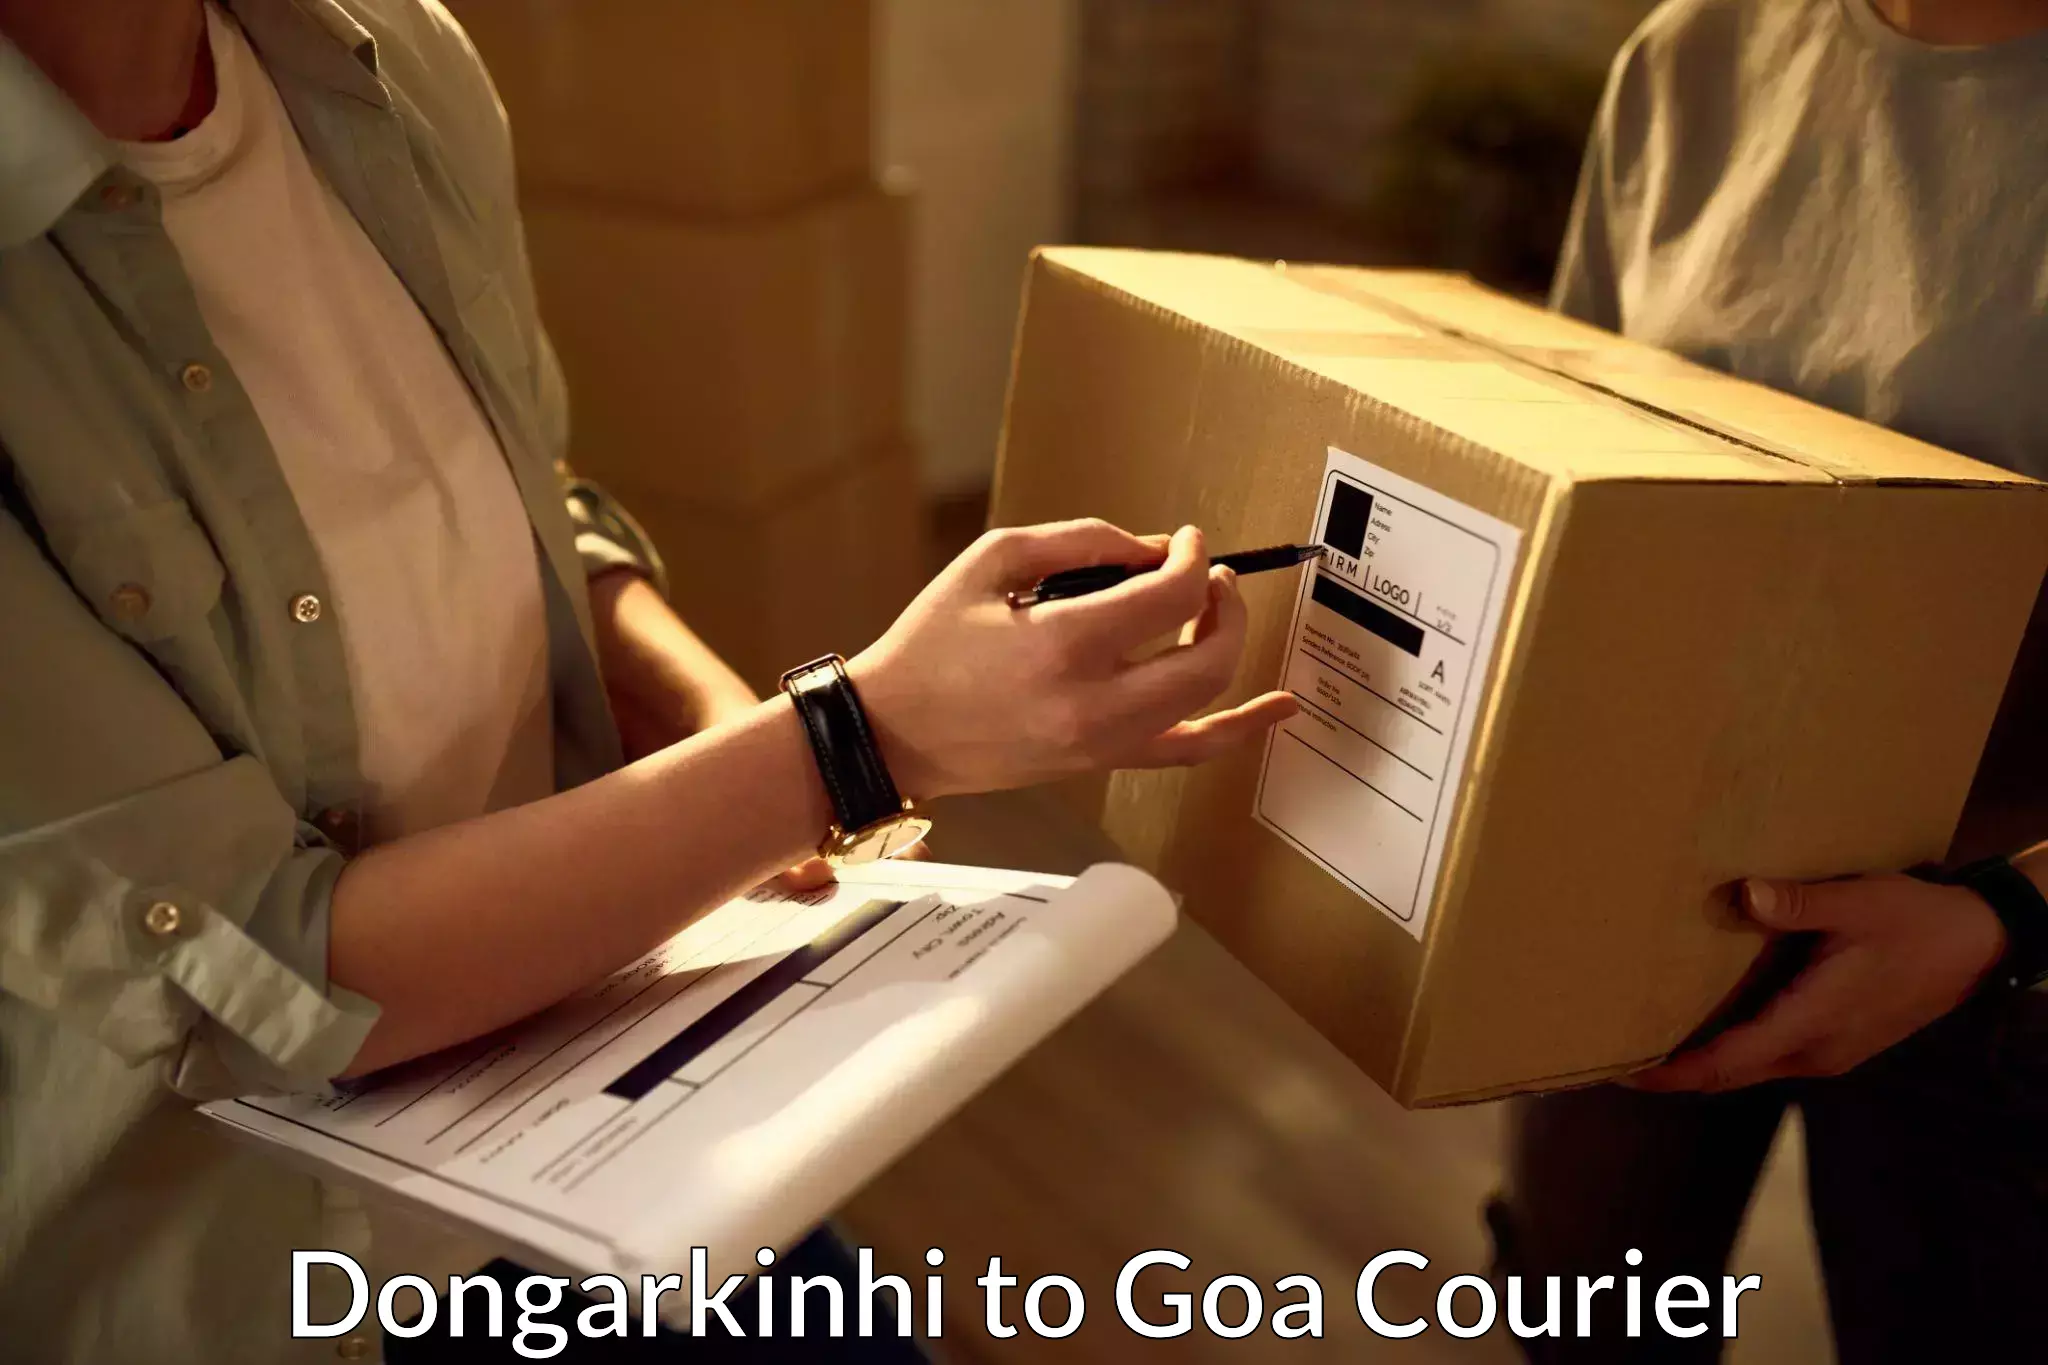 Global courier networks Dongarkinhi to Goa